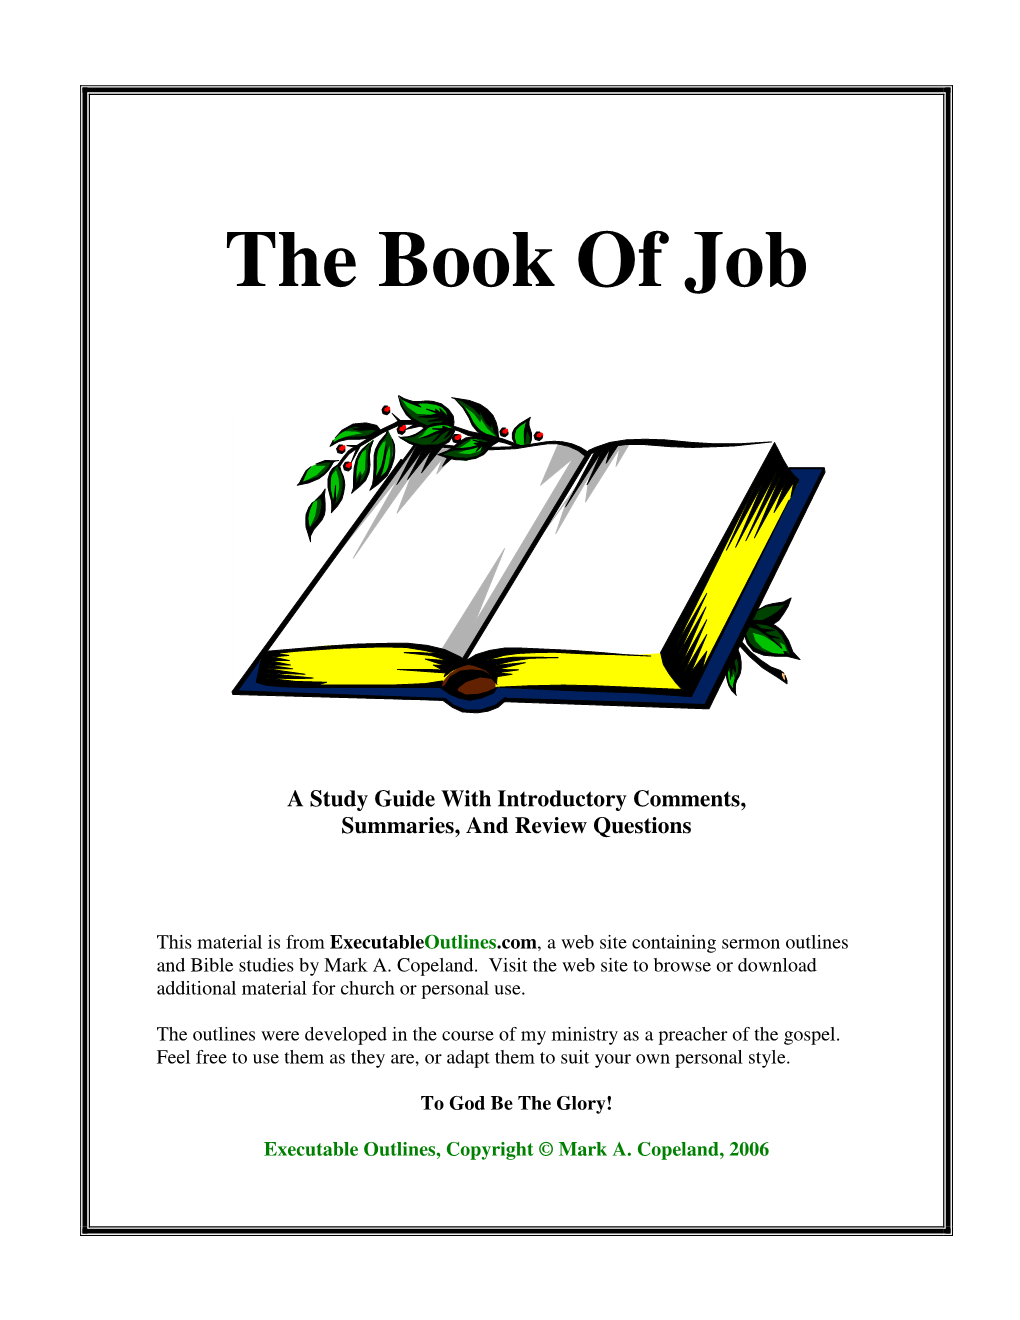 The Book of Job